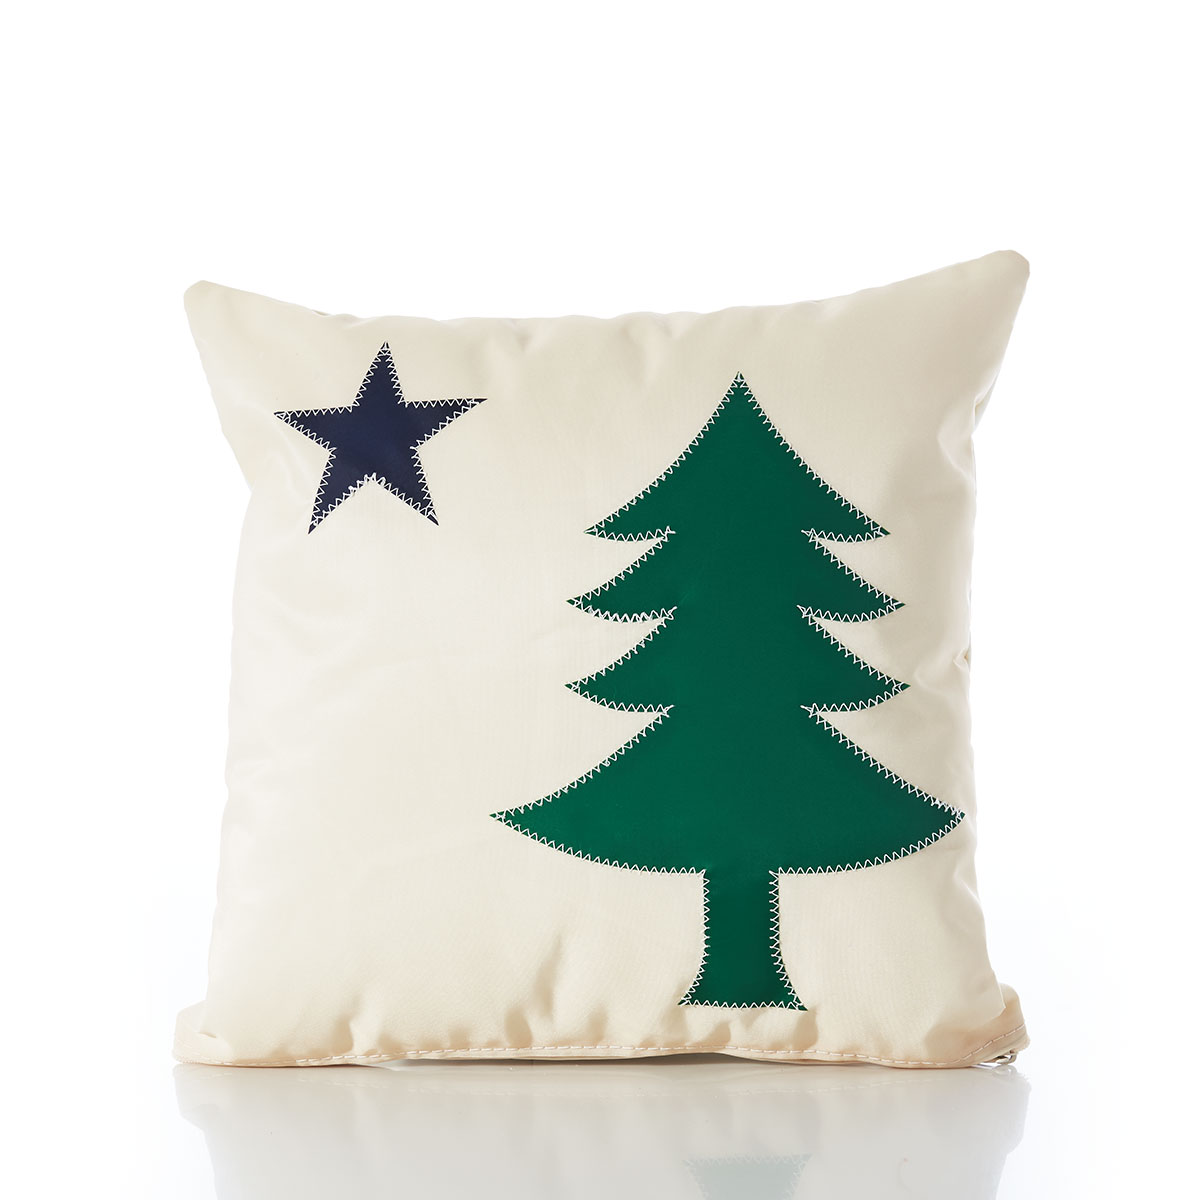 recycled sail cloth pillow featuring a navy star and green pine tree from Maine's original state flag, with hemp rope handles